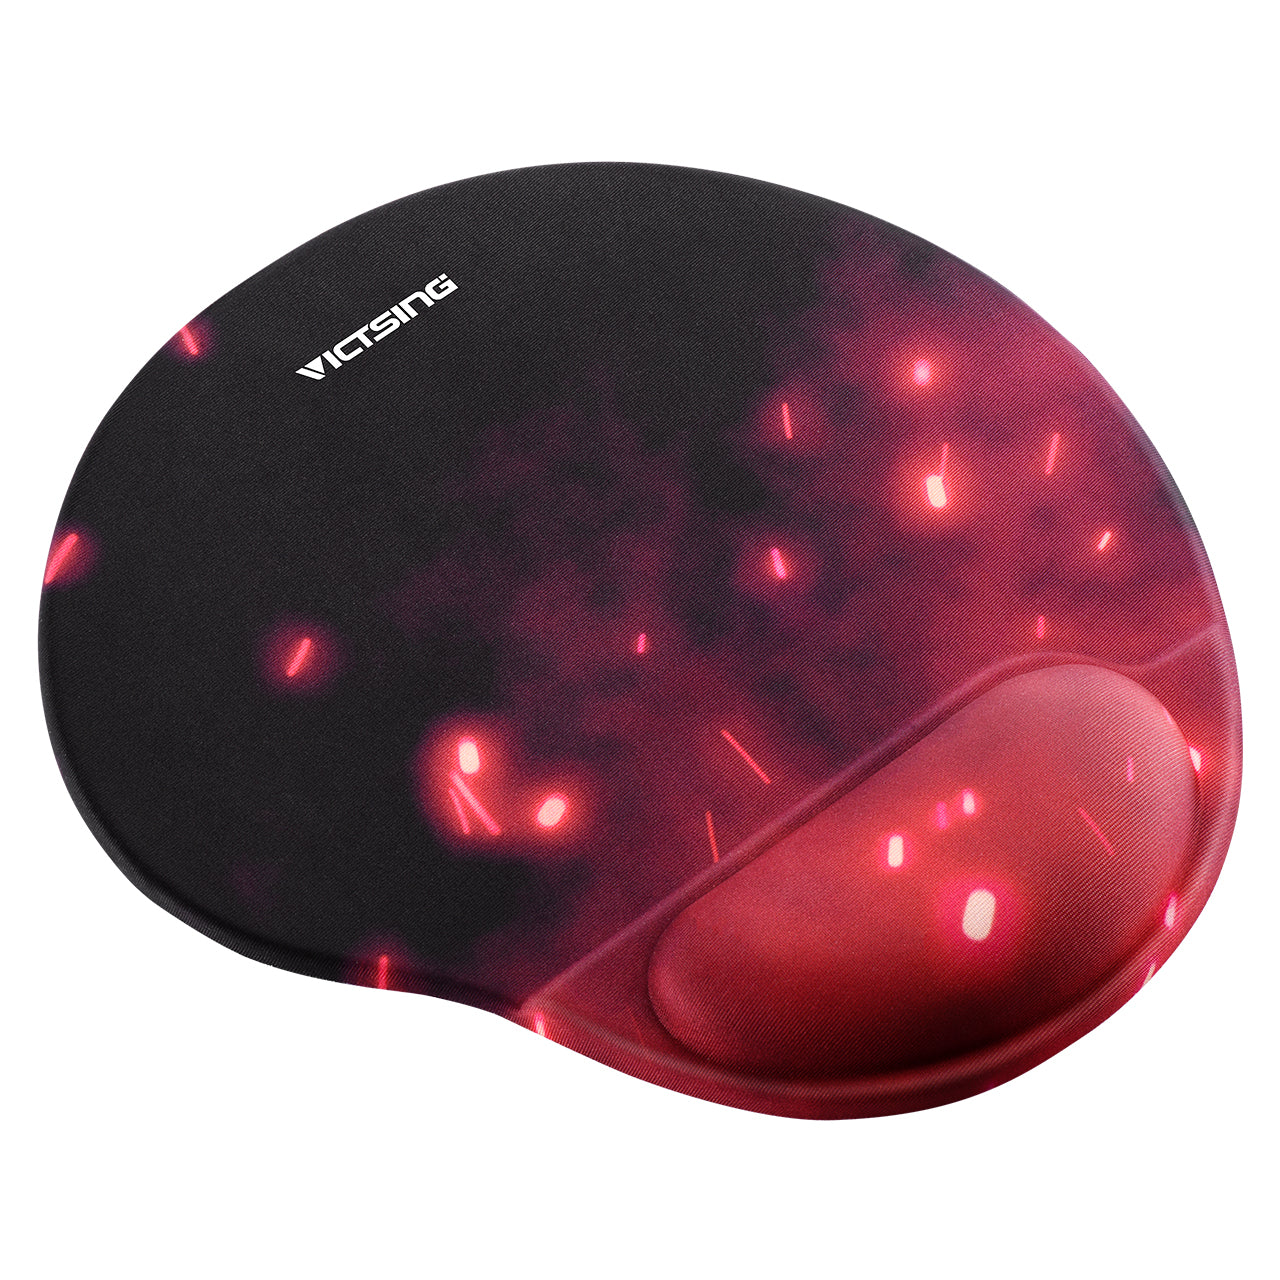 Victsing Ergnomic Gaming Mouse Pad With Gel Wrist Rest Red And Black 6192